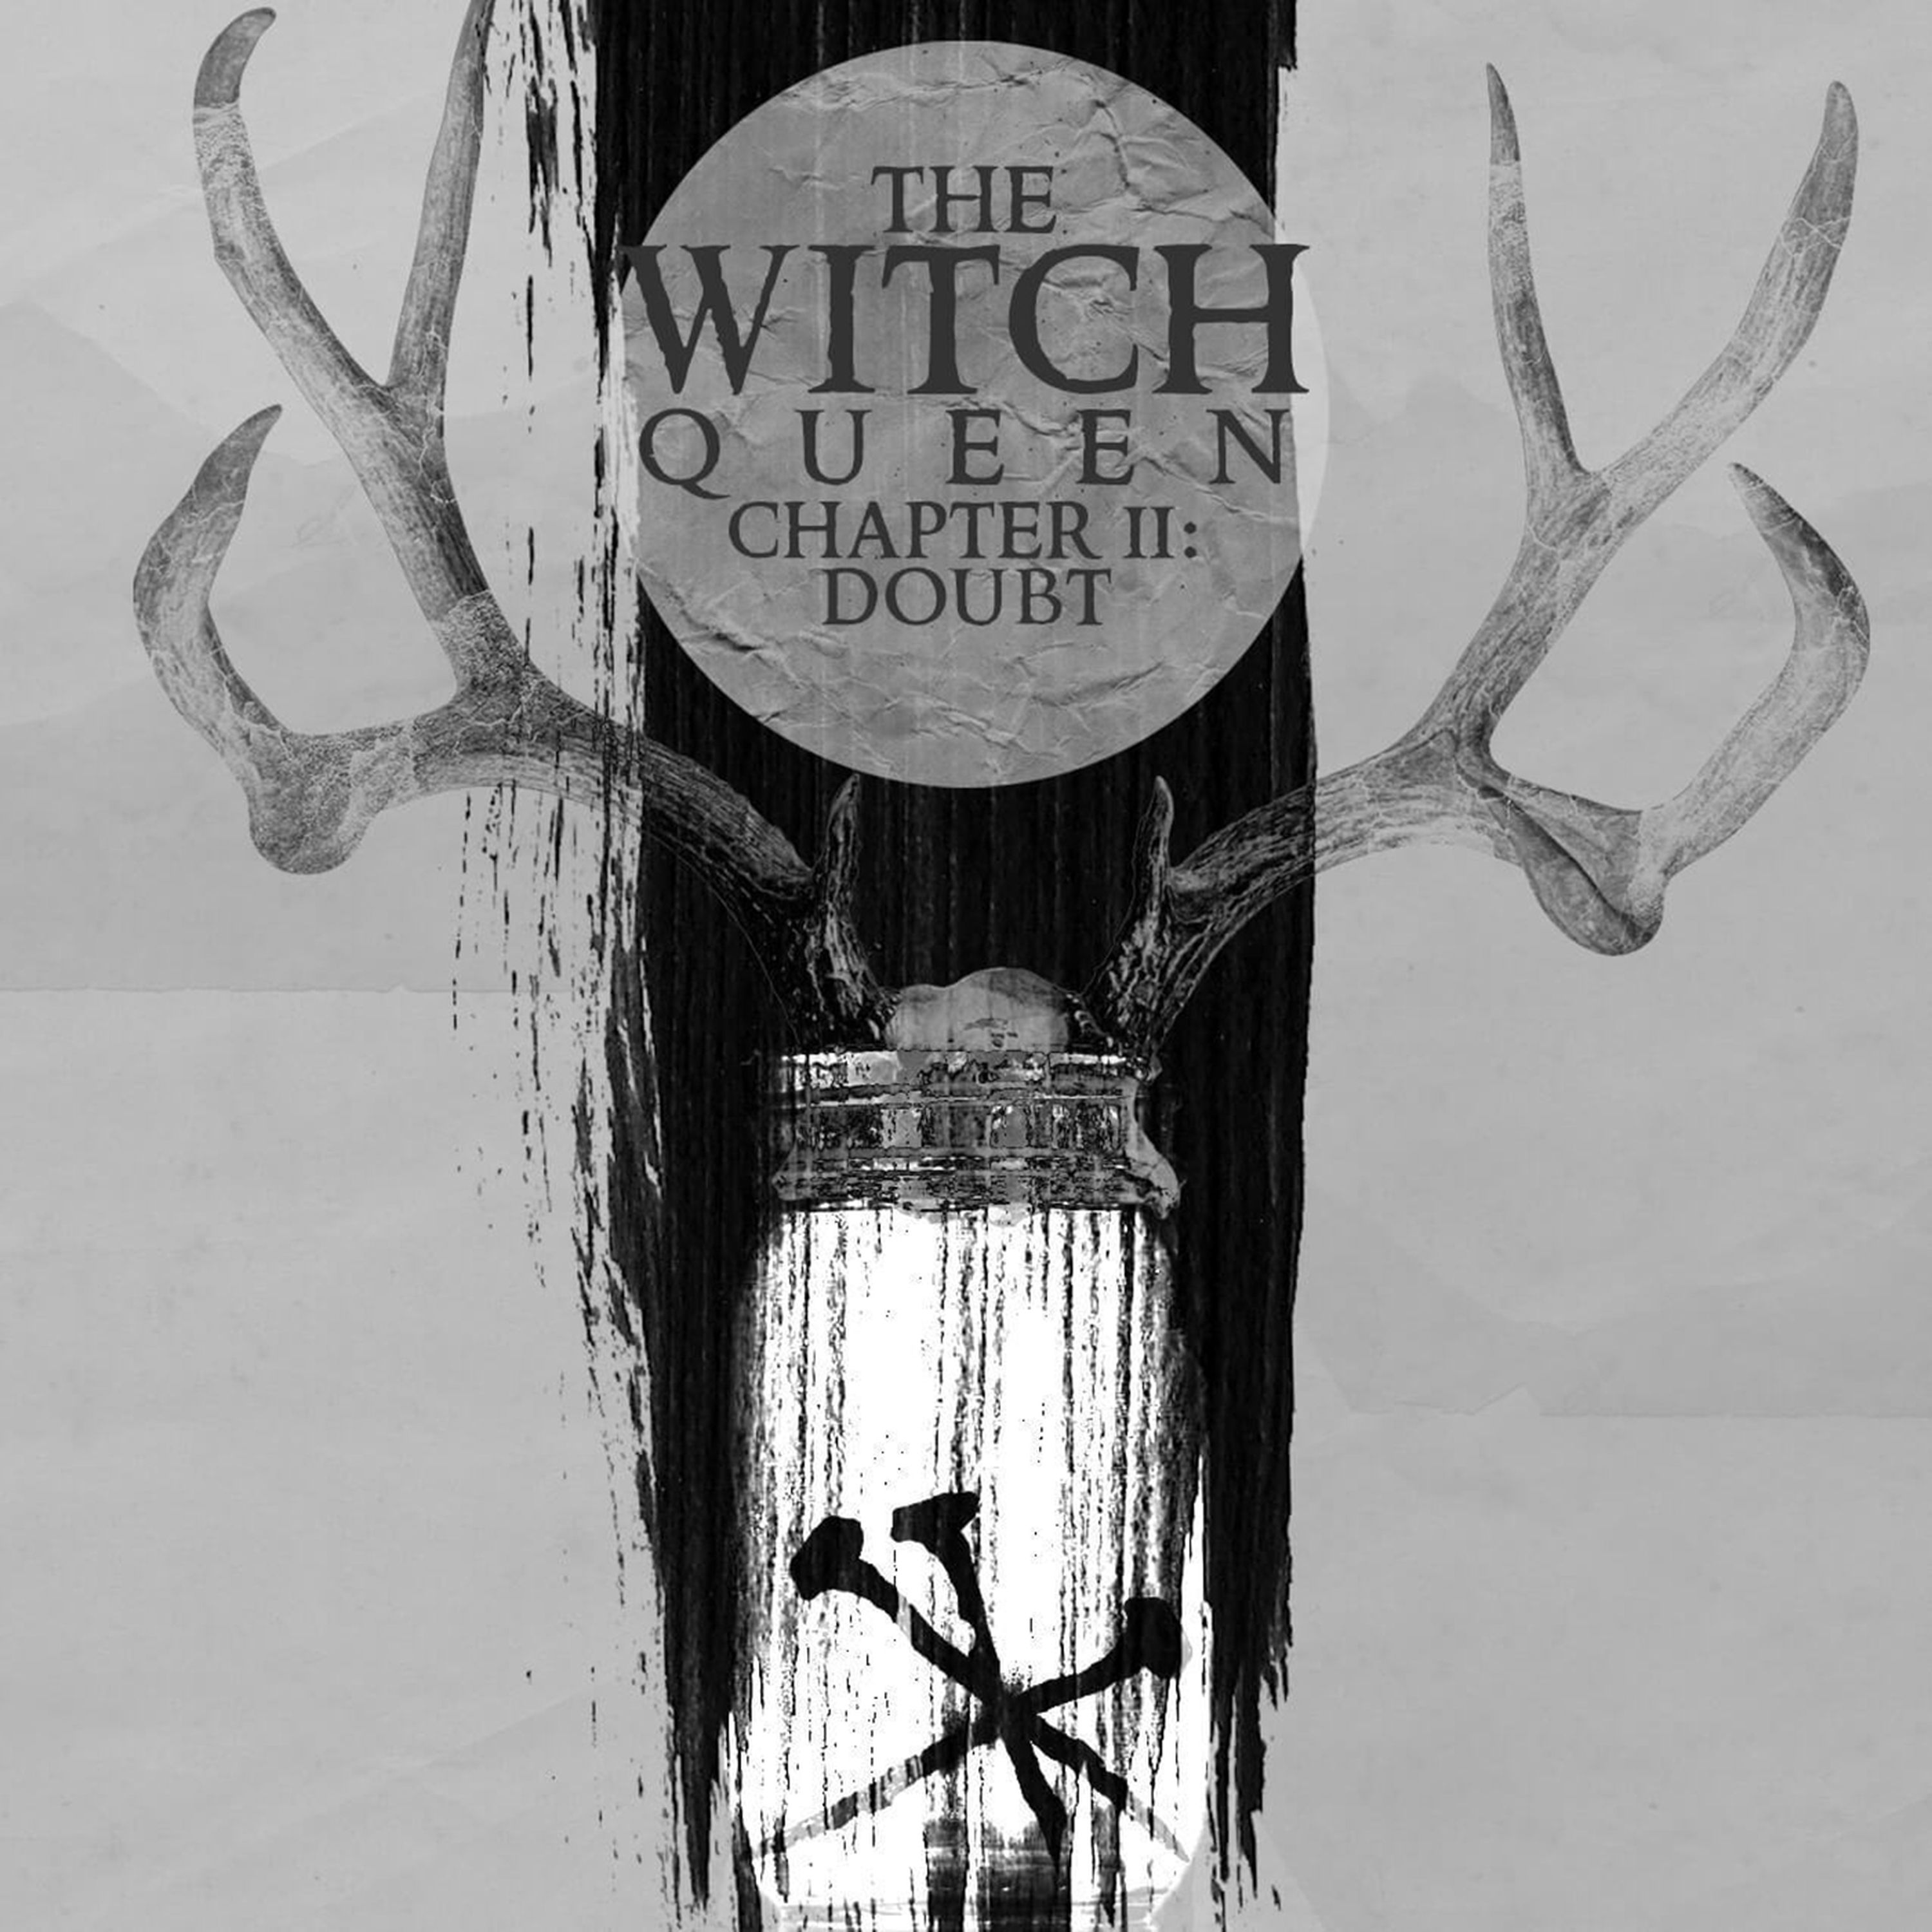 Episode 6: The Witch Queen Chapter II: Doubt